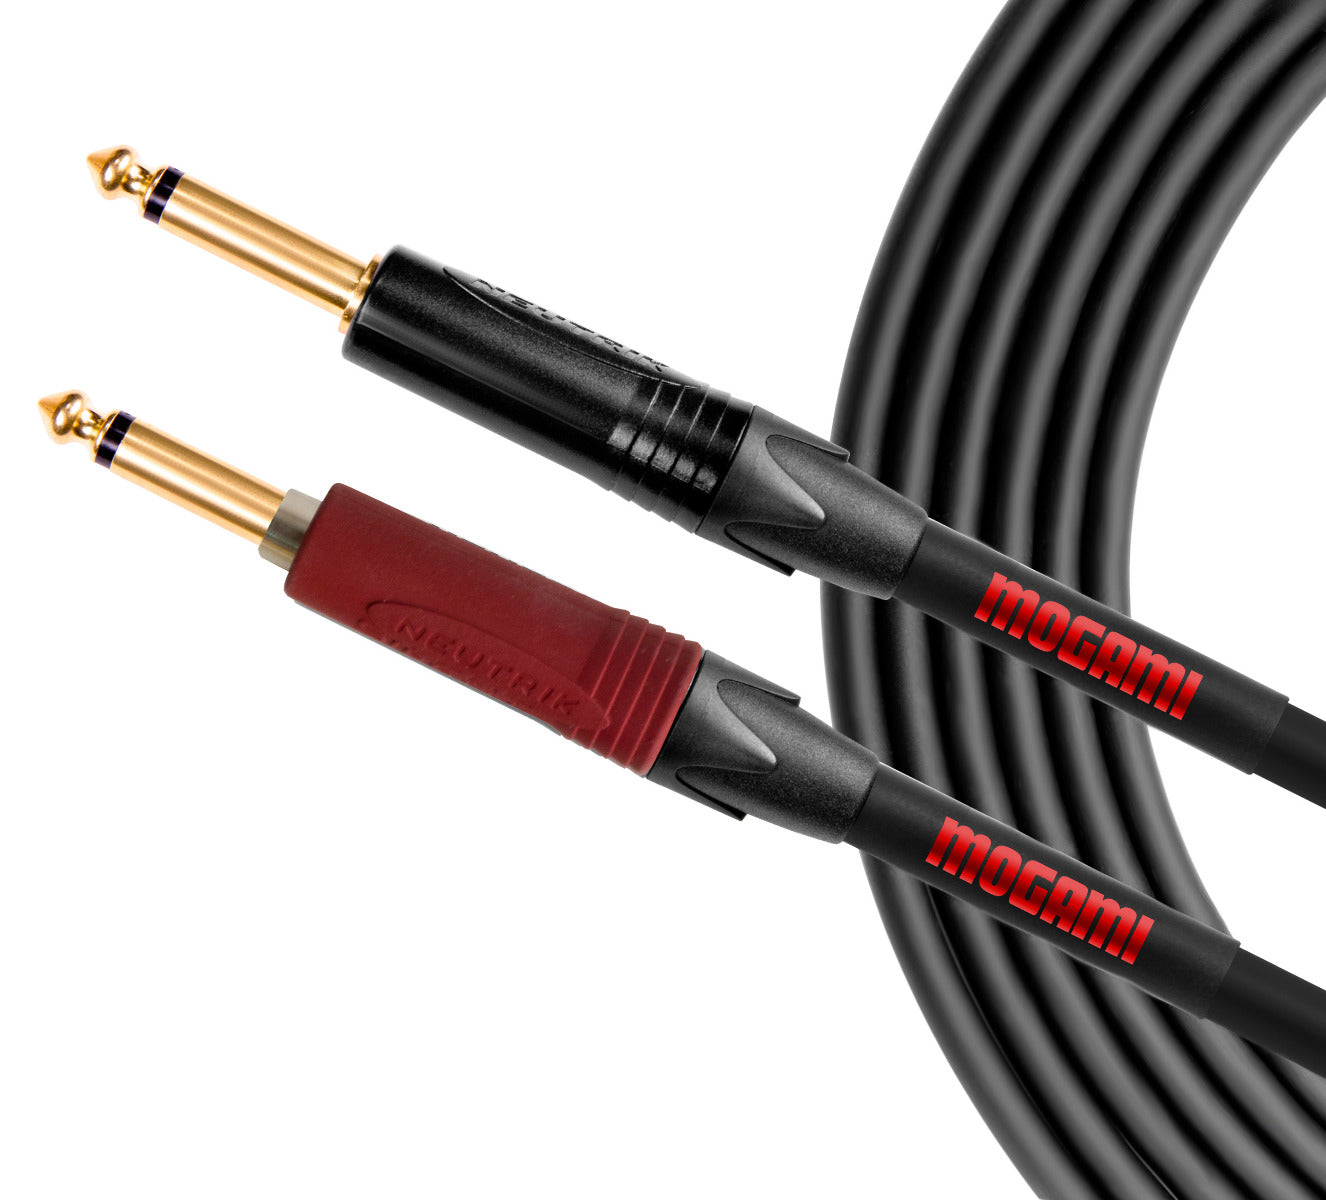 Mogami Overdrive Guitar Cable - 40'